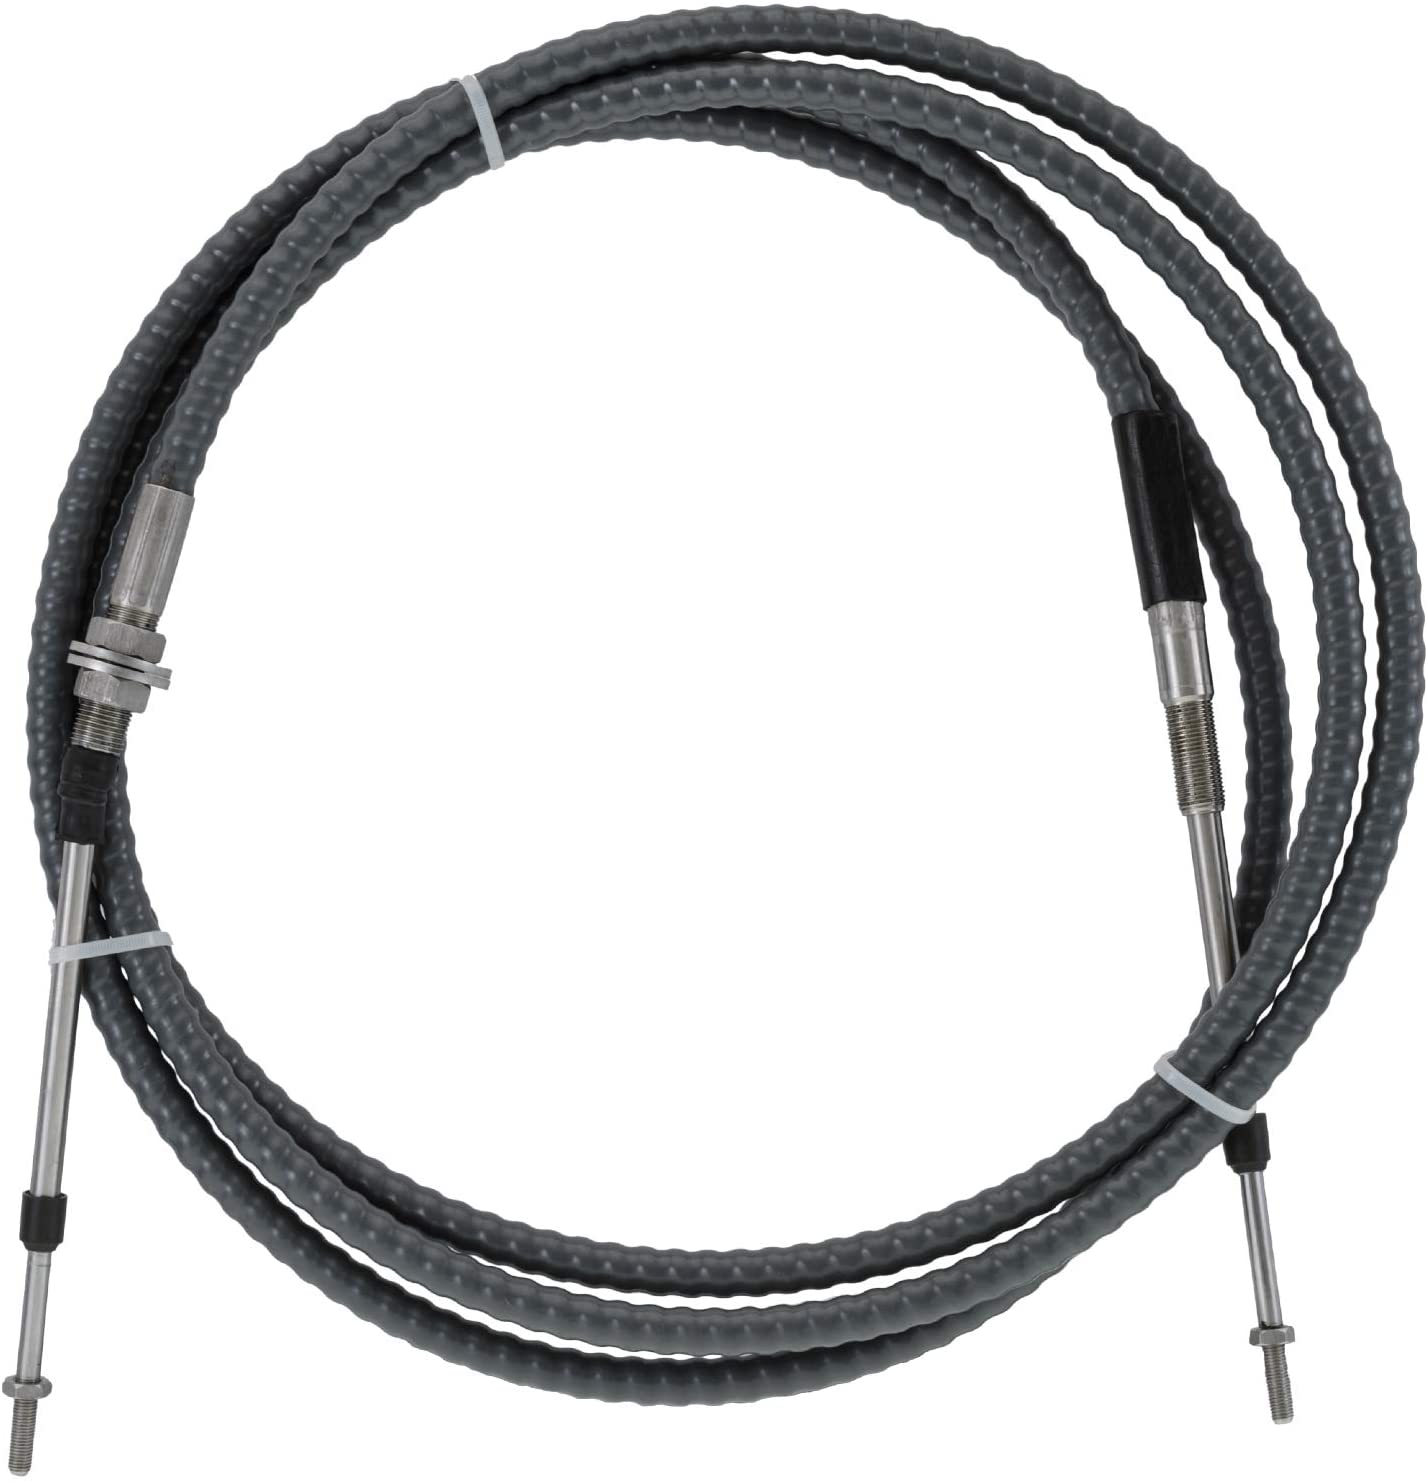 Jet Boat Steering Cable Compatible with Sea-Doo Challenger 180